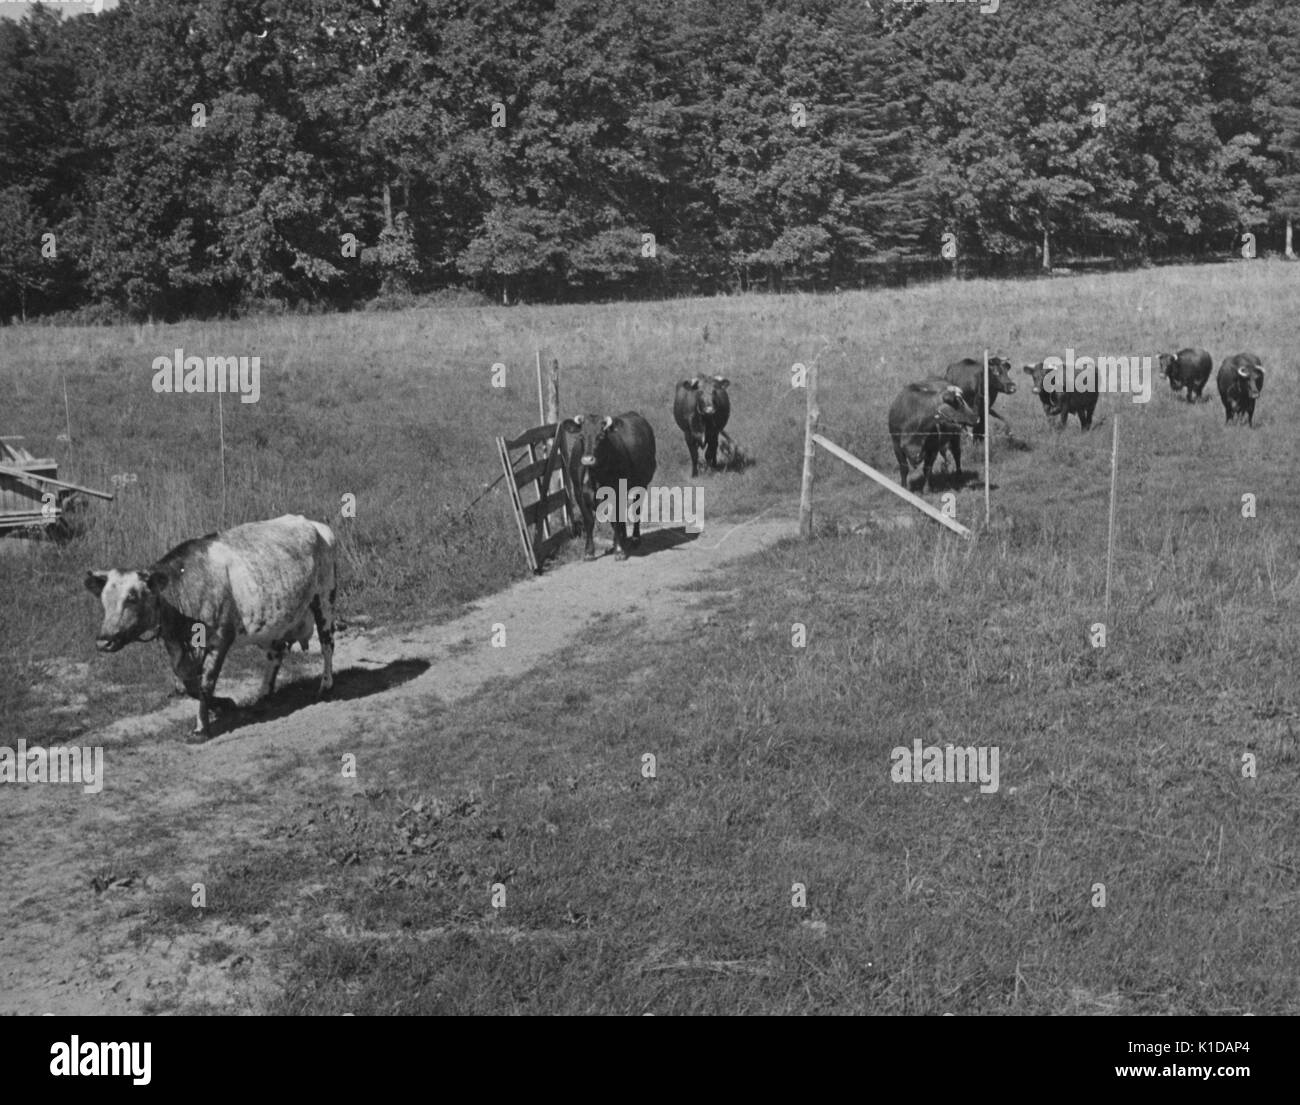 Cows walking on a path at a farm in Price Georges County, Maryland, 1935. From the New York Public Library. Stock Photo